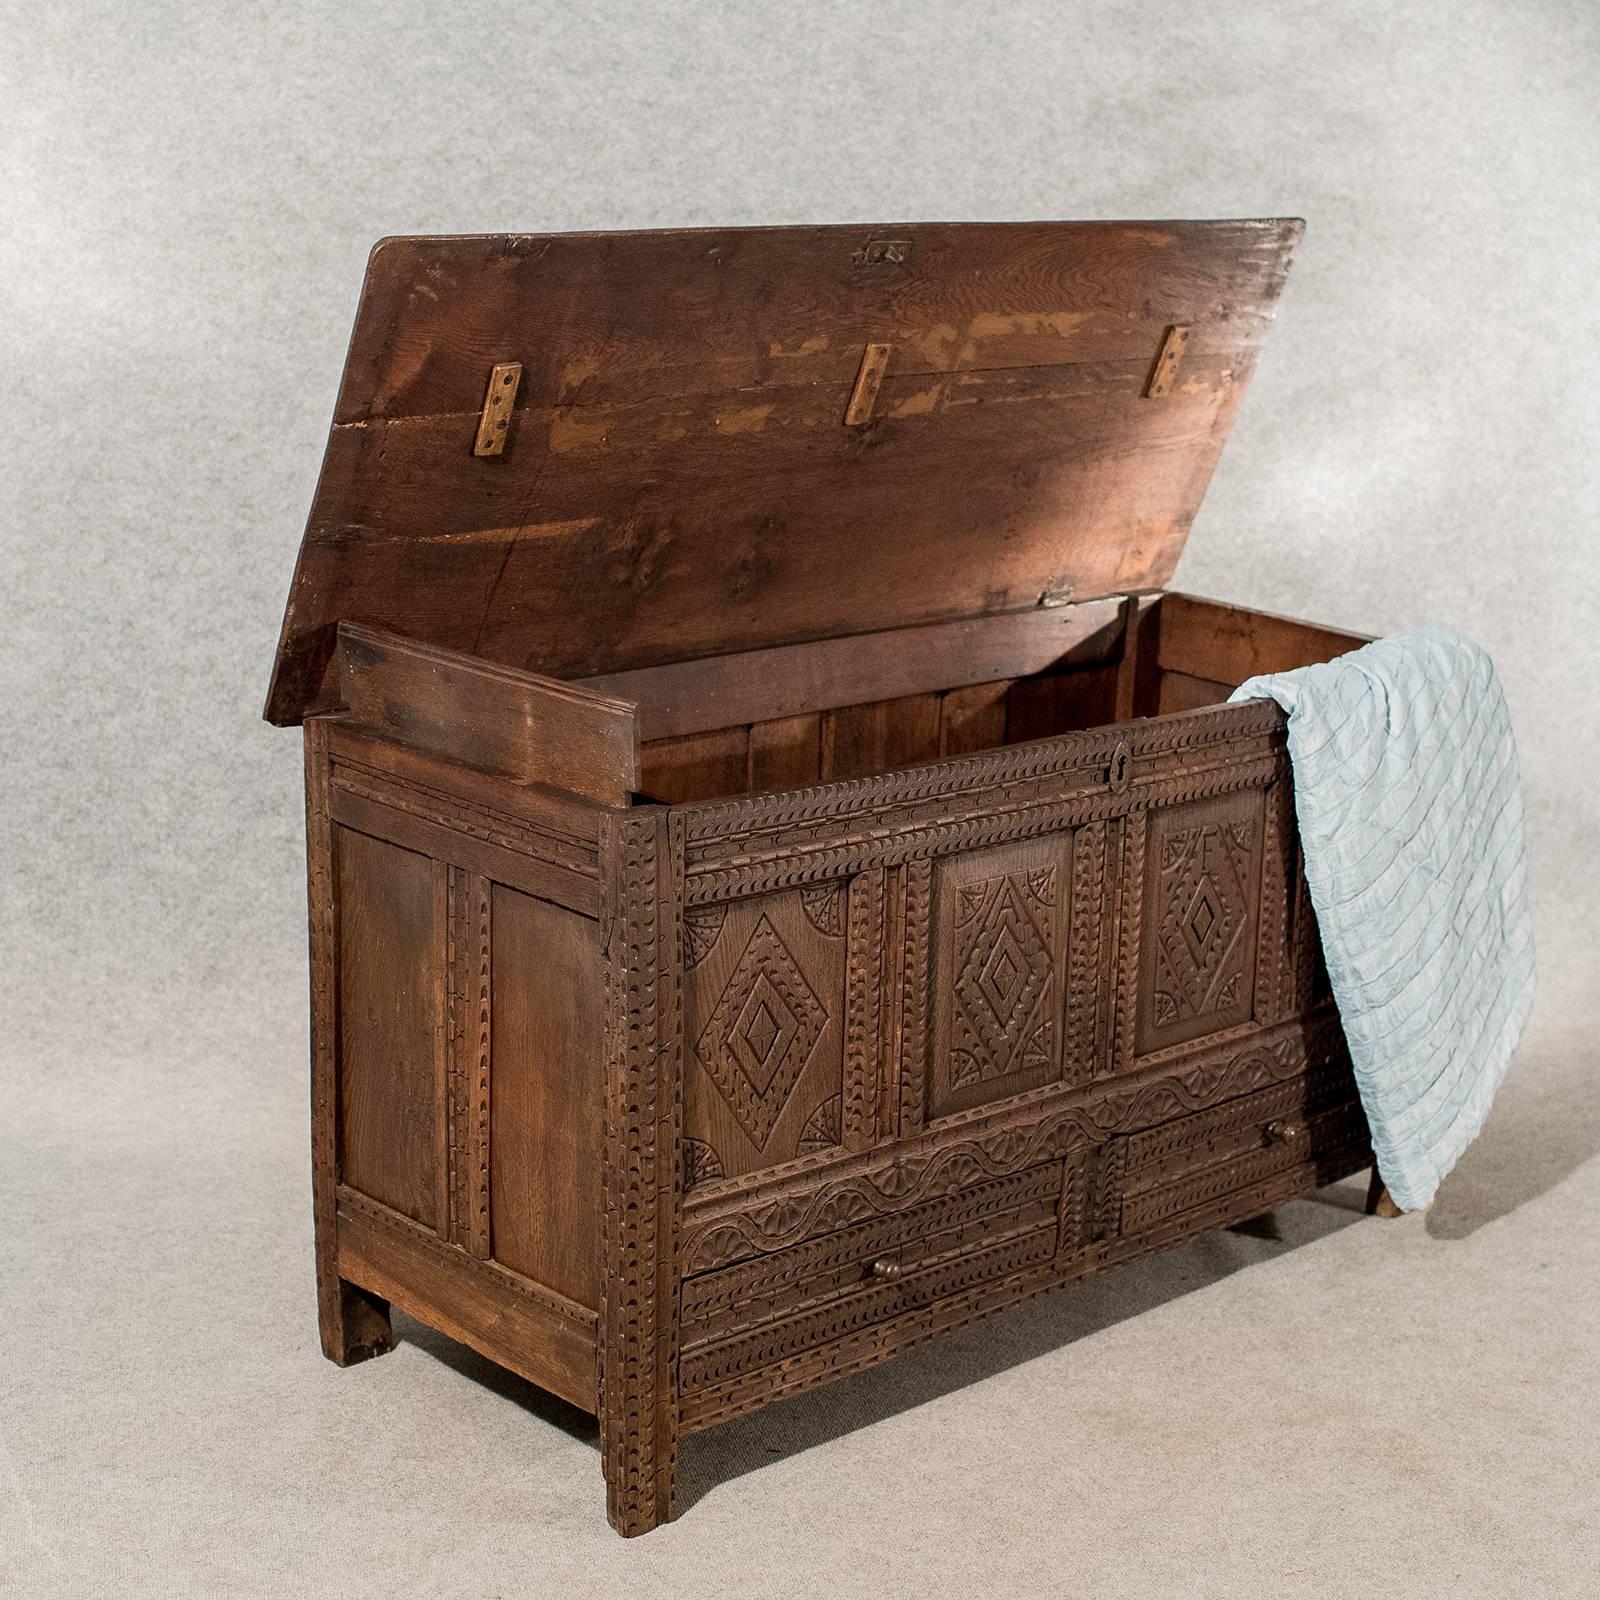 A very pleasing original coffer chest presented in good antique condition
Usefully sized and offering practicality with classic antique charm
Of interest displaying quality geometric hand-carved detail throughout and showing the letters A & F to